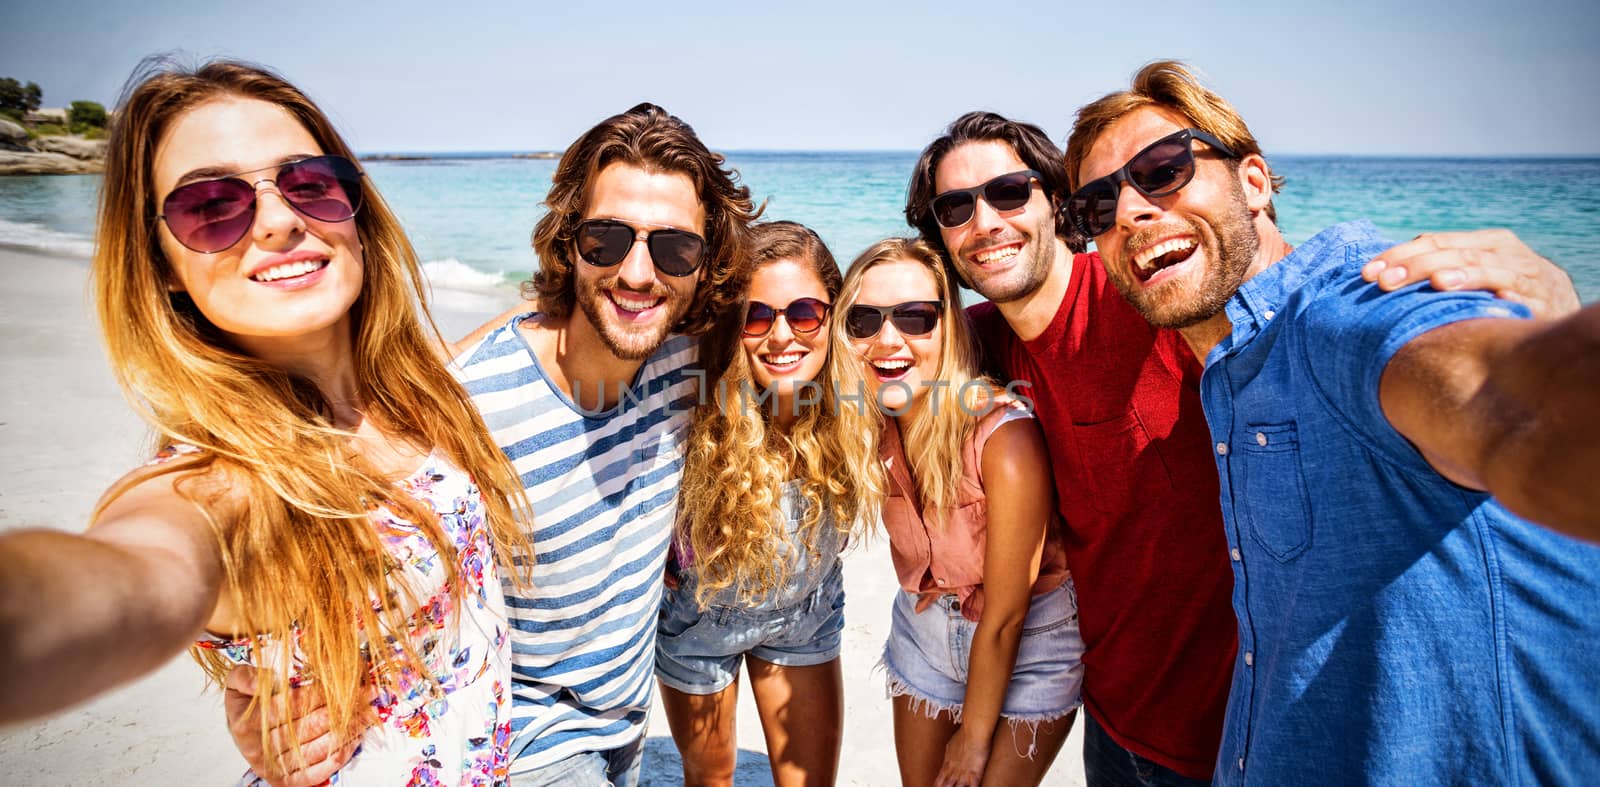 Cheerful friends at beach on sunny day by Wavebreakmedia